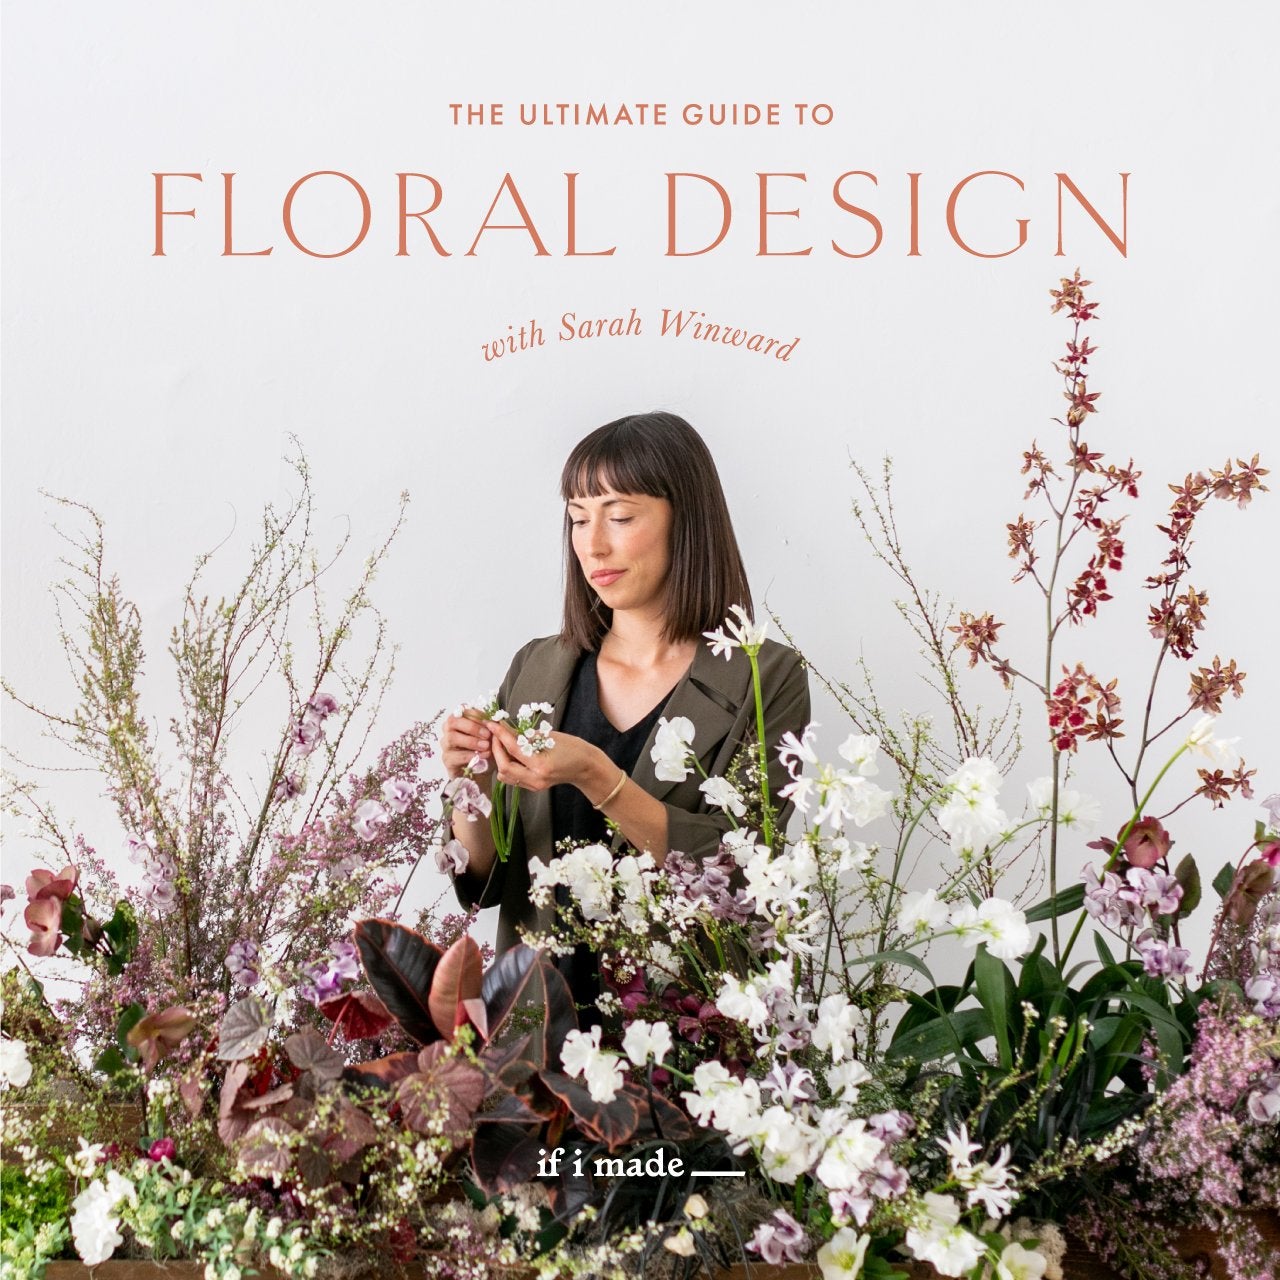 The Ultimate Guide to Floral Design with Sarah Winward (SPP) - 19 payments of $99